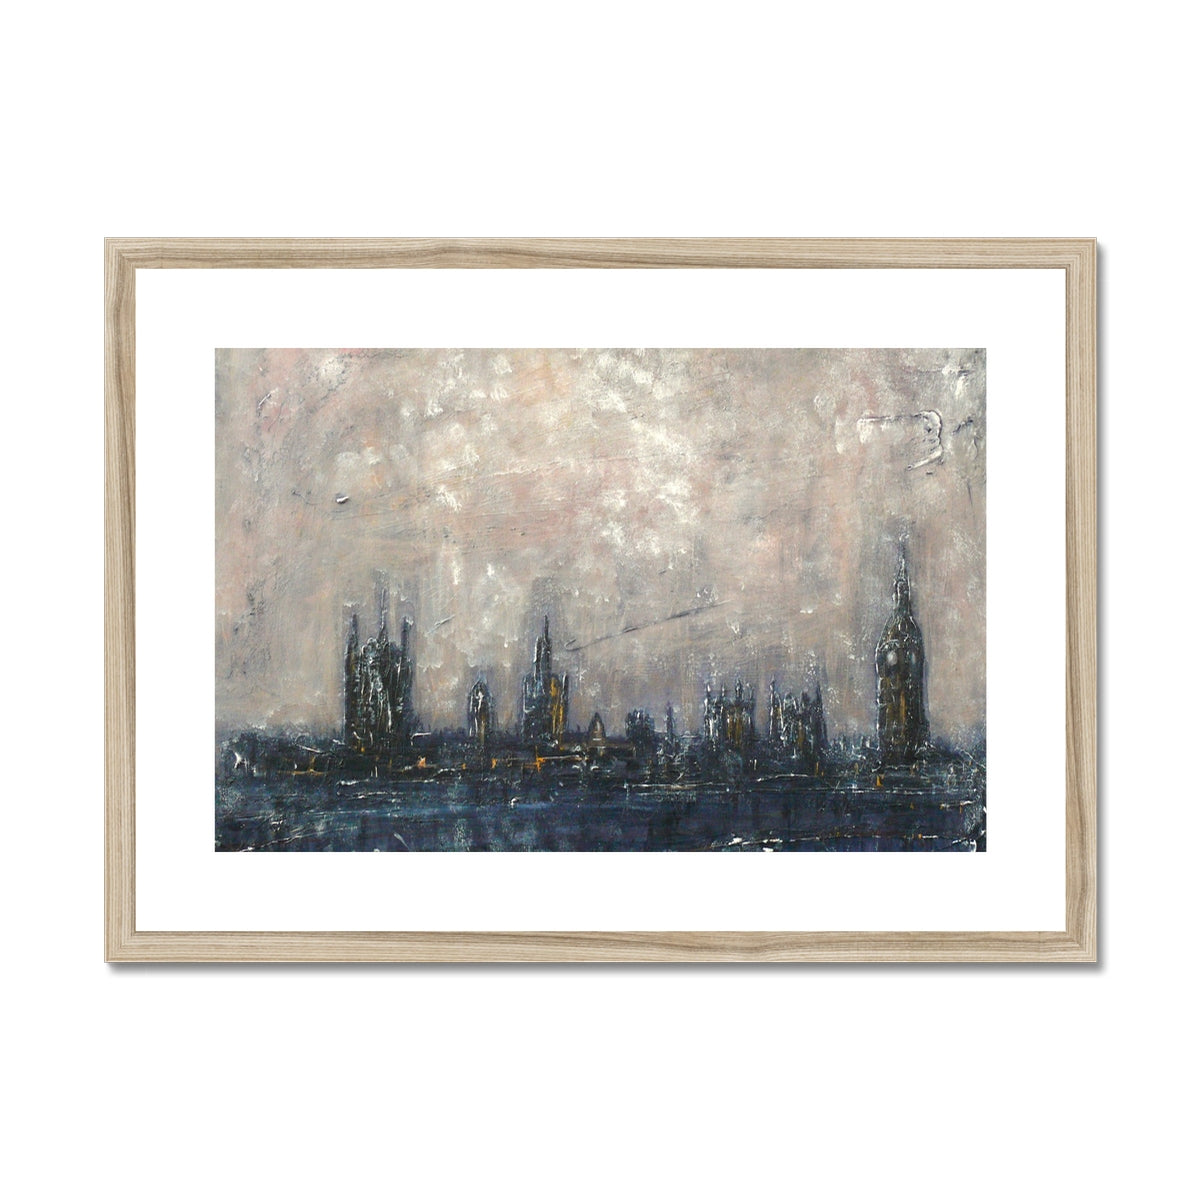 Winter In London Painting | Framed & Mounted Prints From Scotland-Framed & Mounted Prints-World Art Gallery-A2 Landscape-Natural Frame-Paintings, Prints, Homeware, Art Gifts From Scotland By Scottish Artist Kevin Hunter